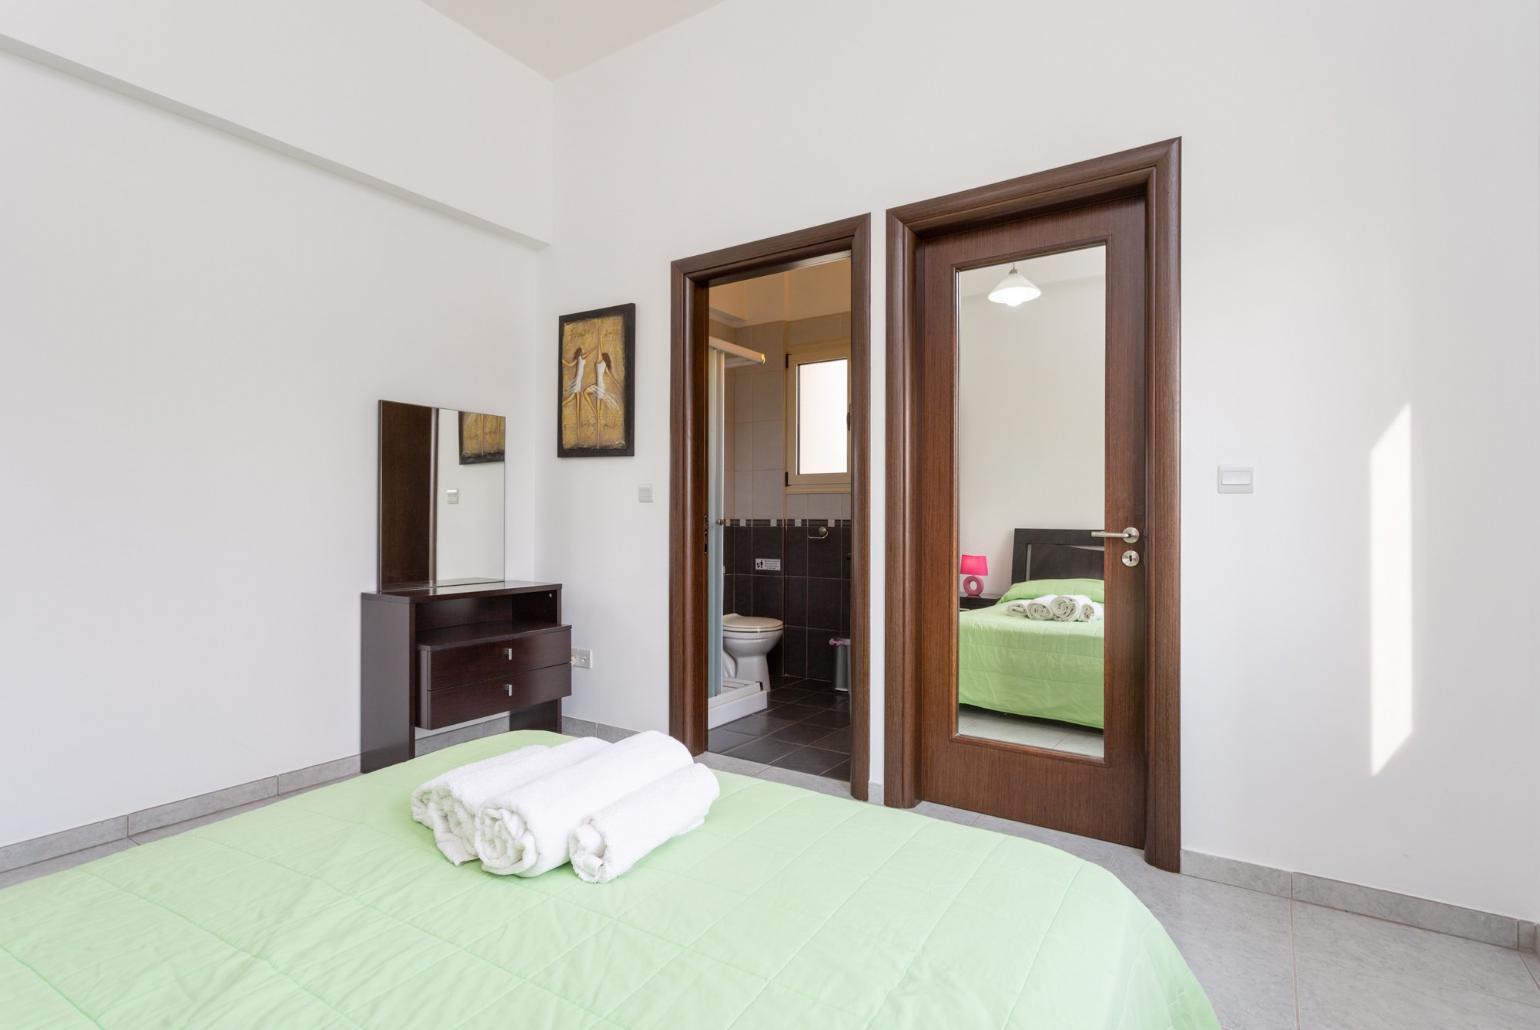 Double bedroom with en suite bathroom, A/C, and terrace access